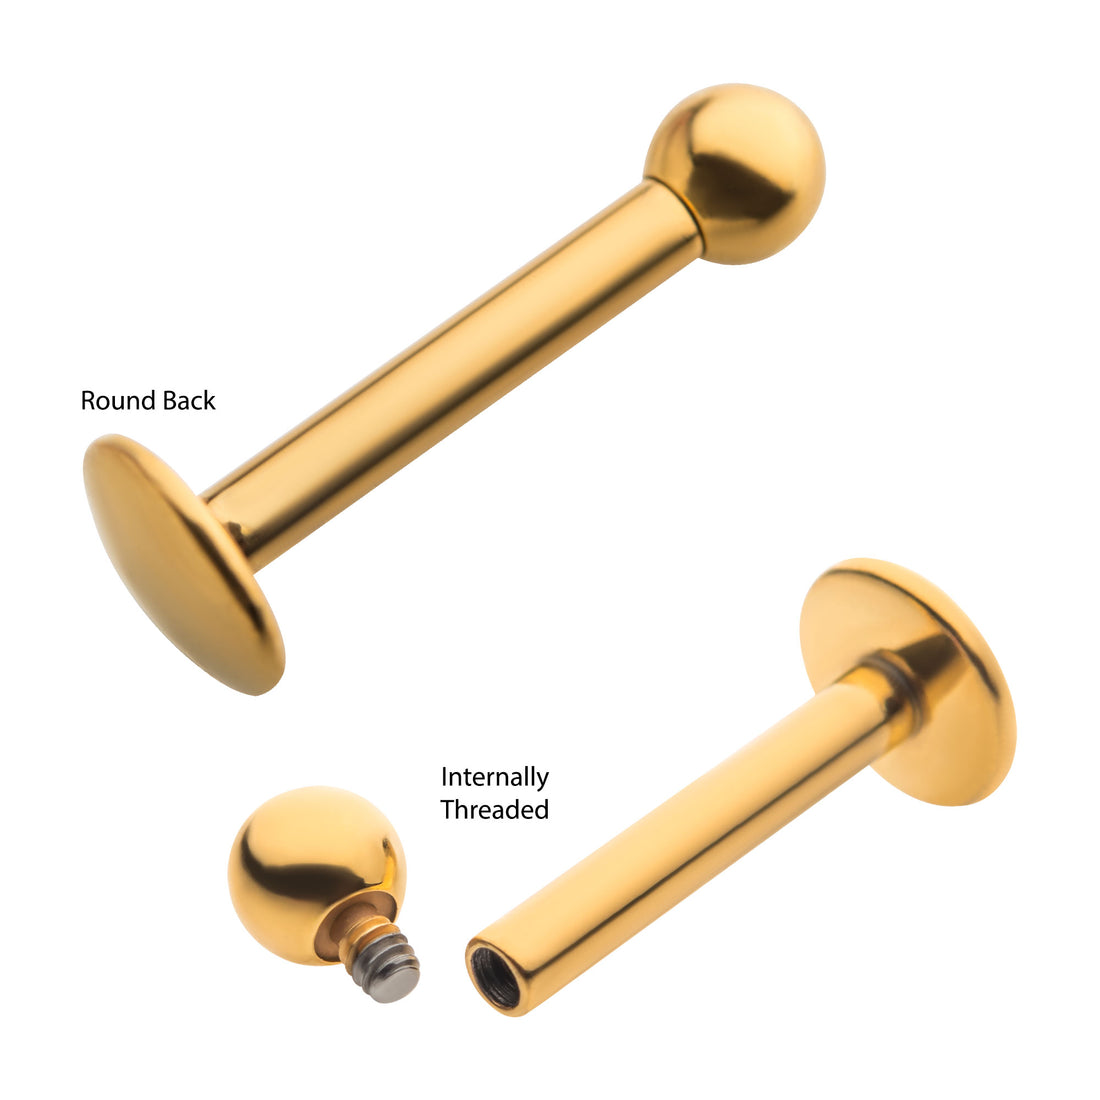 24KT Gold PVD Titanium Internally Threaded Labret with 4mm Base and 3mm Ball